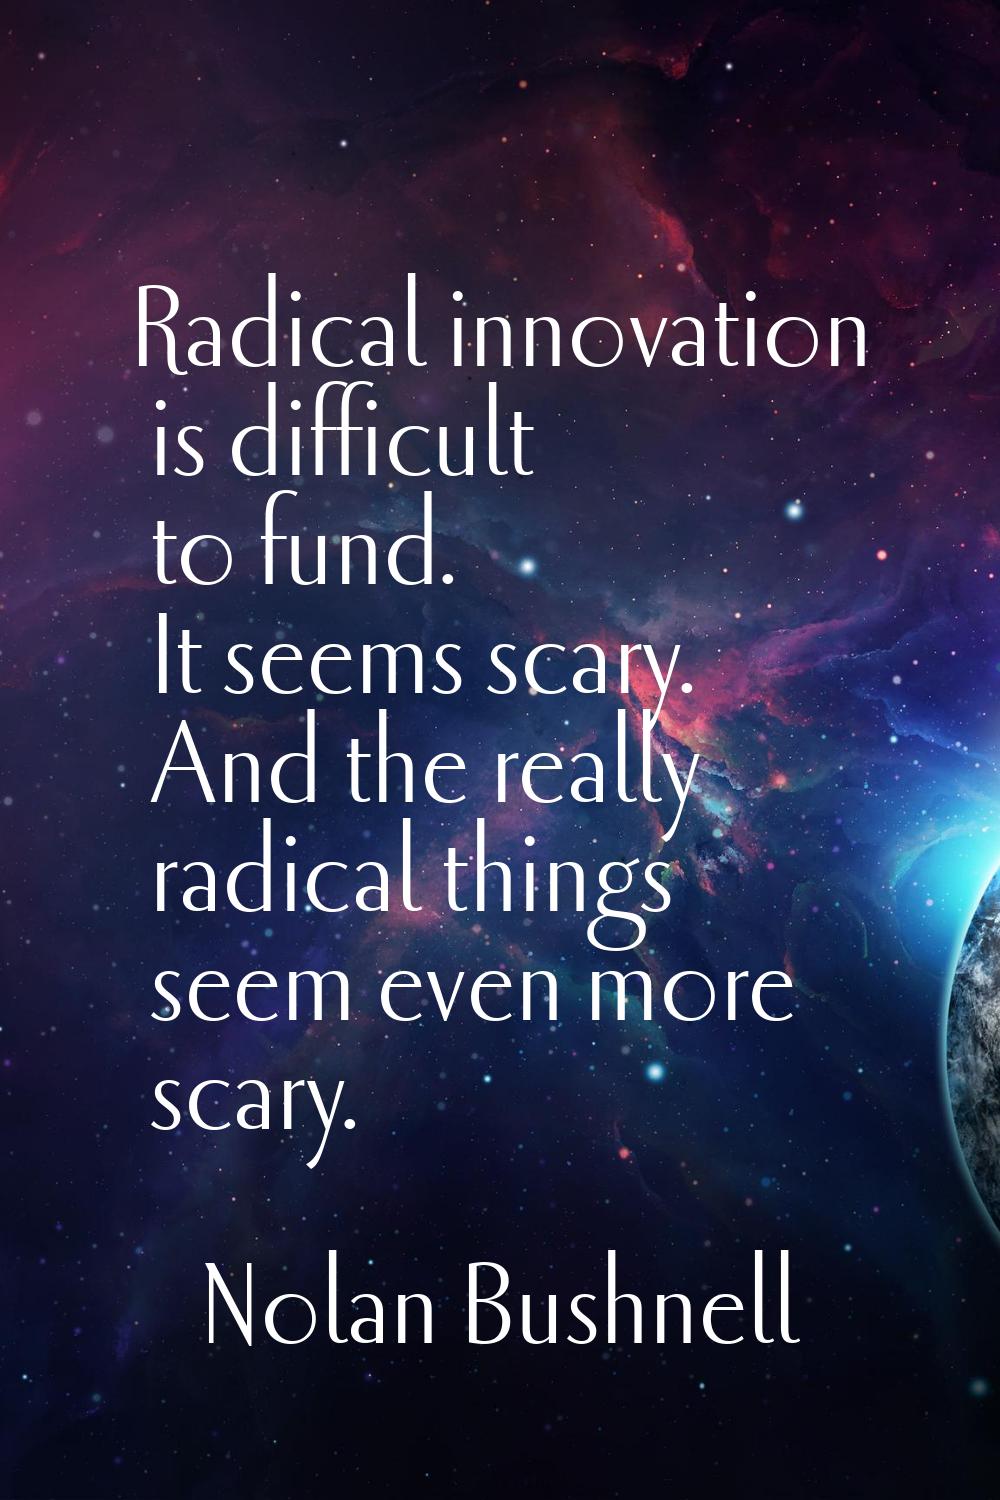 Radical innovation is difficult to fund. It seems scary. And the really radical things seem even mo